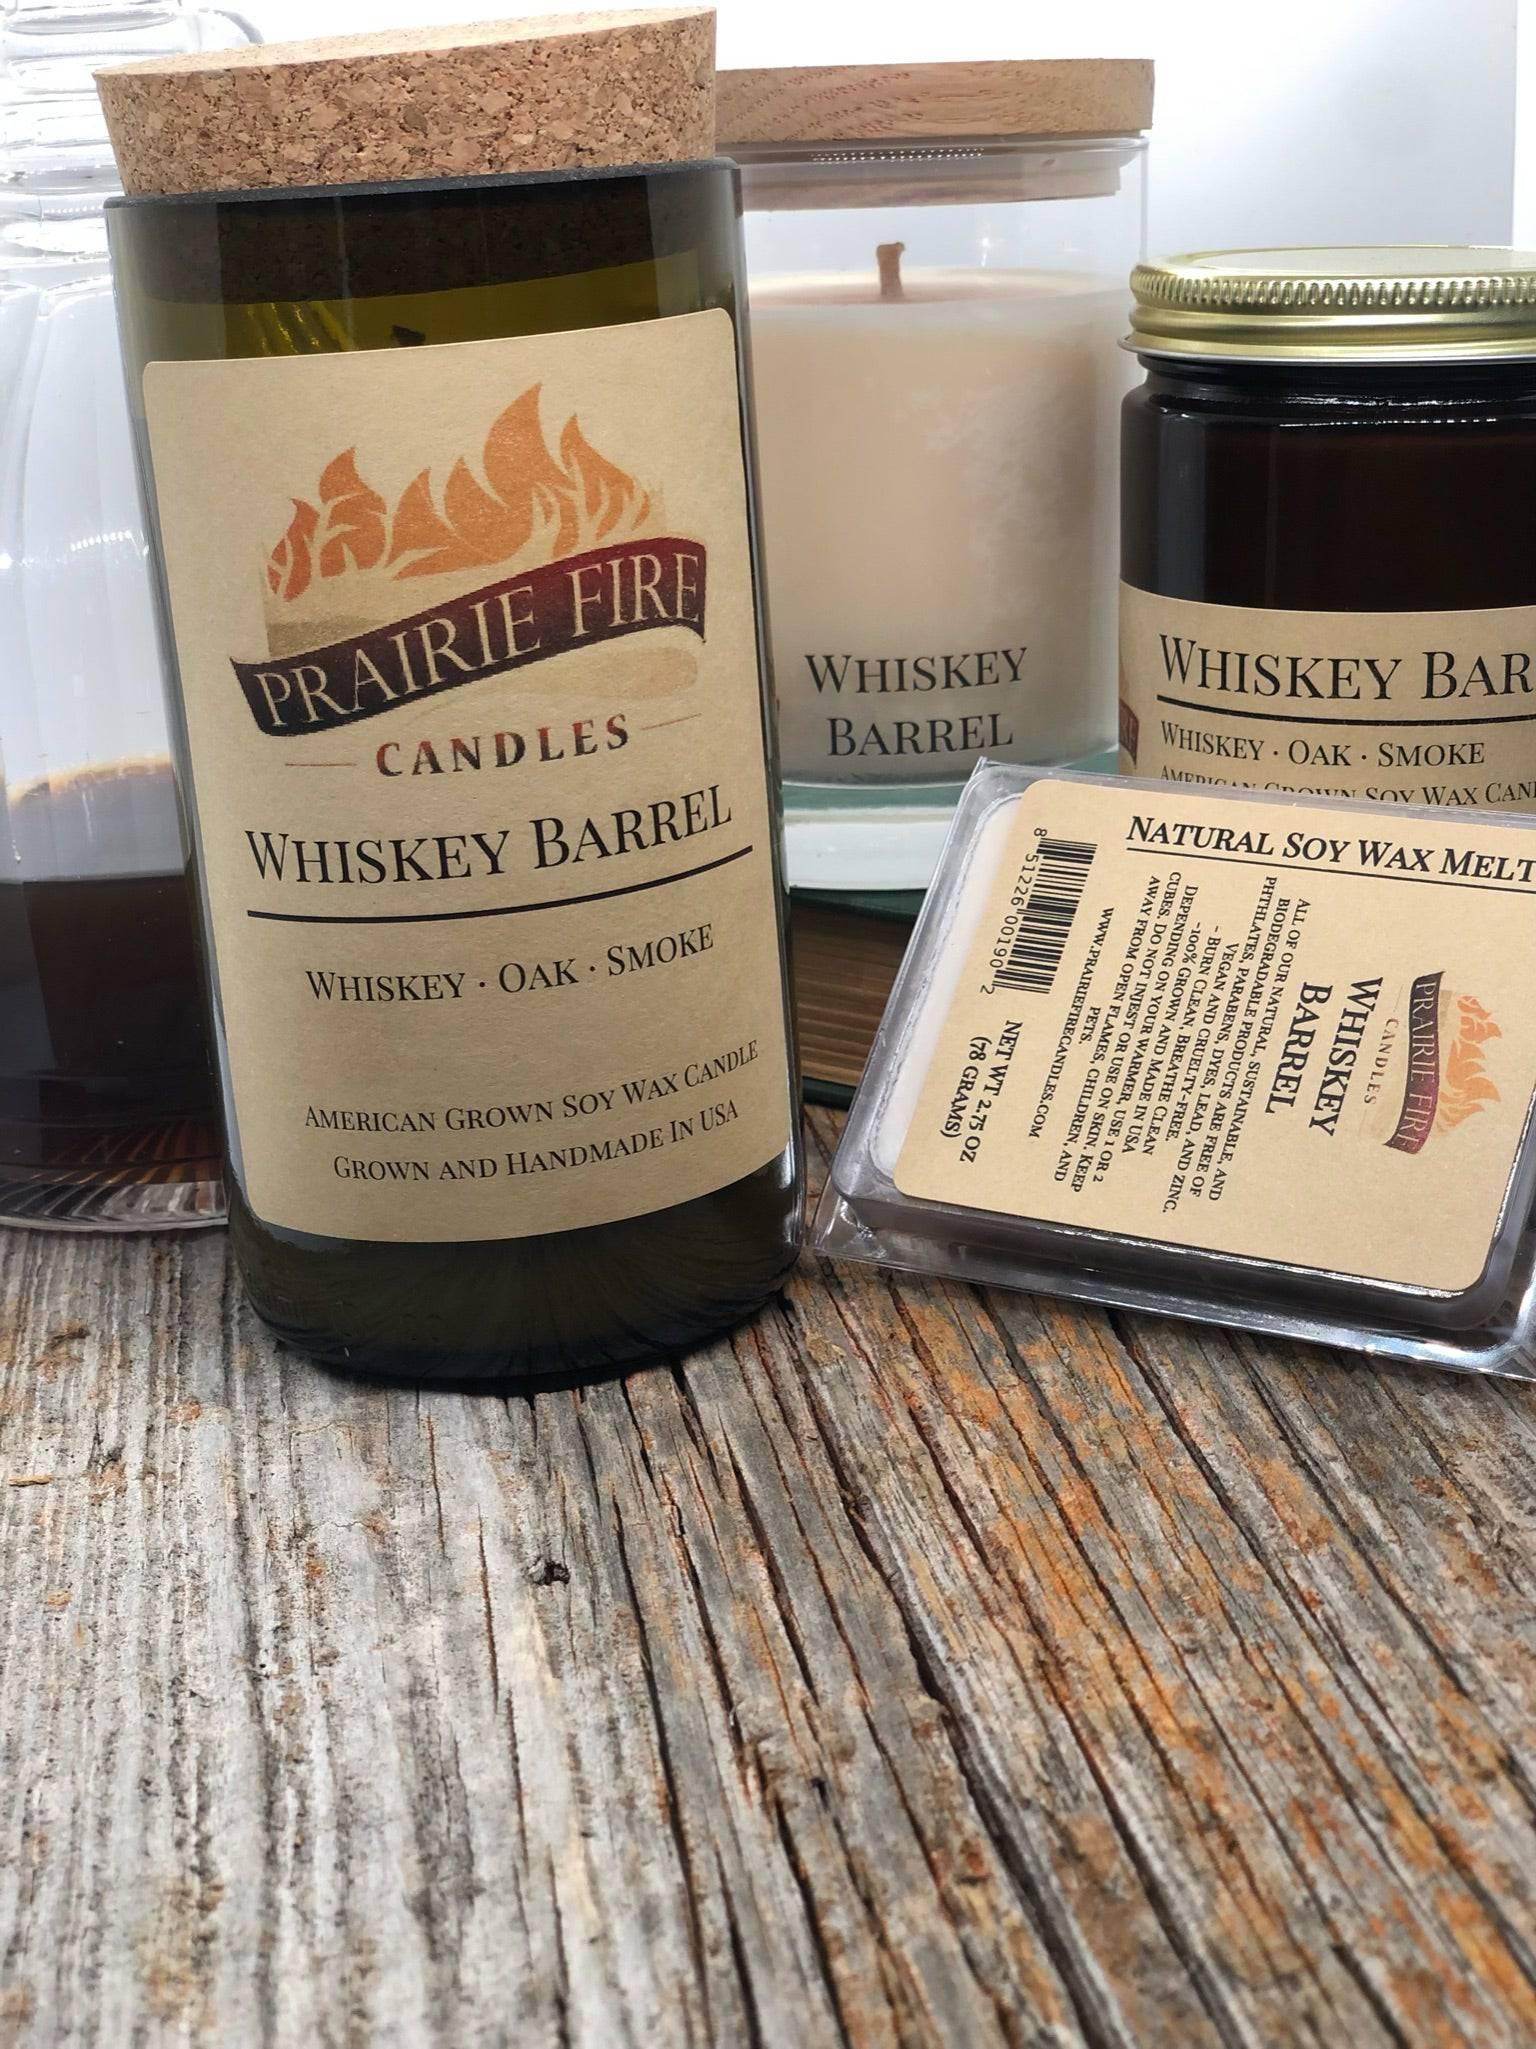 Whiskey Barrel Soy Wax Candle | Repurposed Wine Bottle Candle Natural Cork | Handmade in USA Candle | Eco-Friendly Candle | Non-Toxic Soy Candle - Prairie Fire Candles